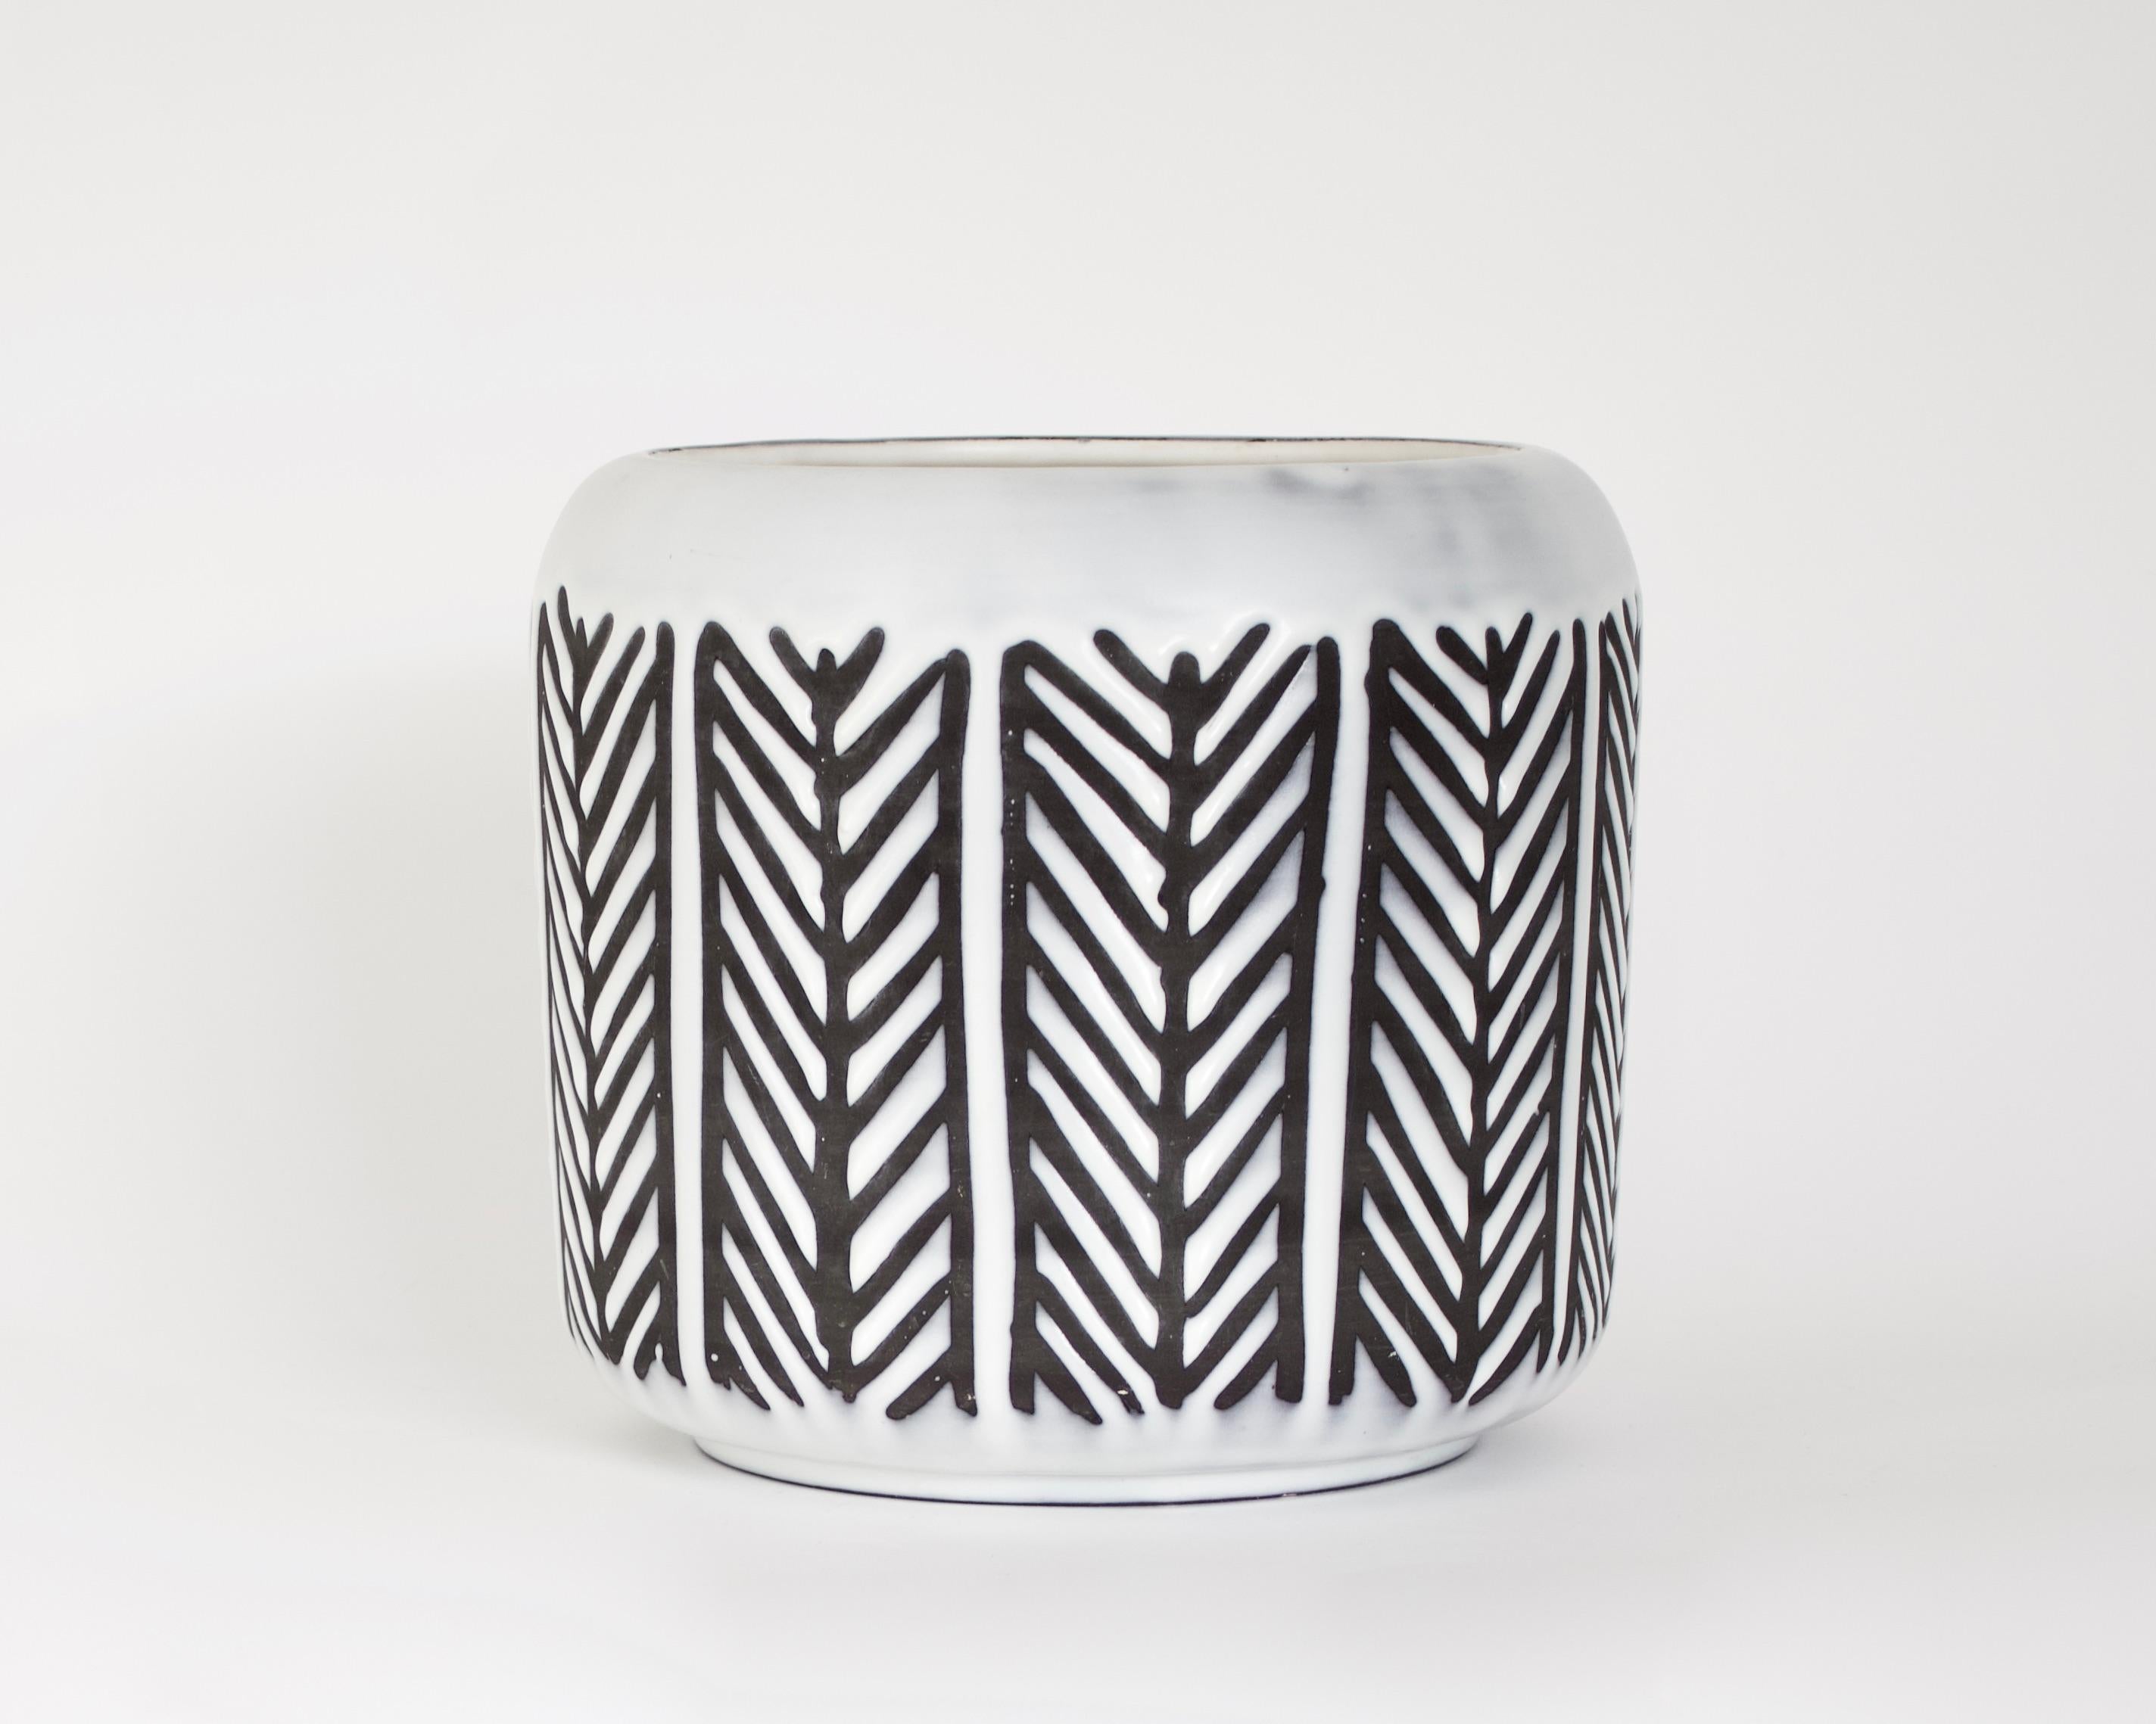 Roger Capron French Ceramic Black and White Cache Pot or Vase, Circa 1956 In Good Condition For Sale In Chicago, IL